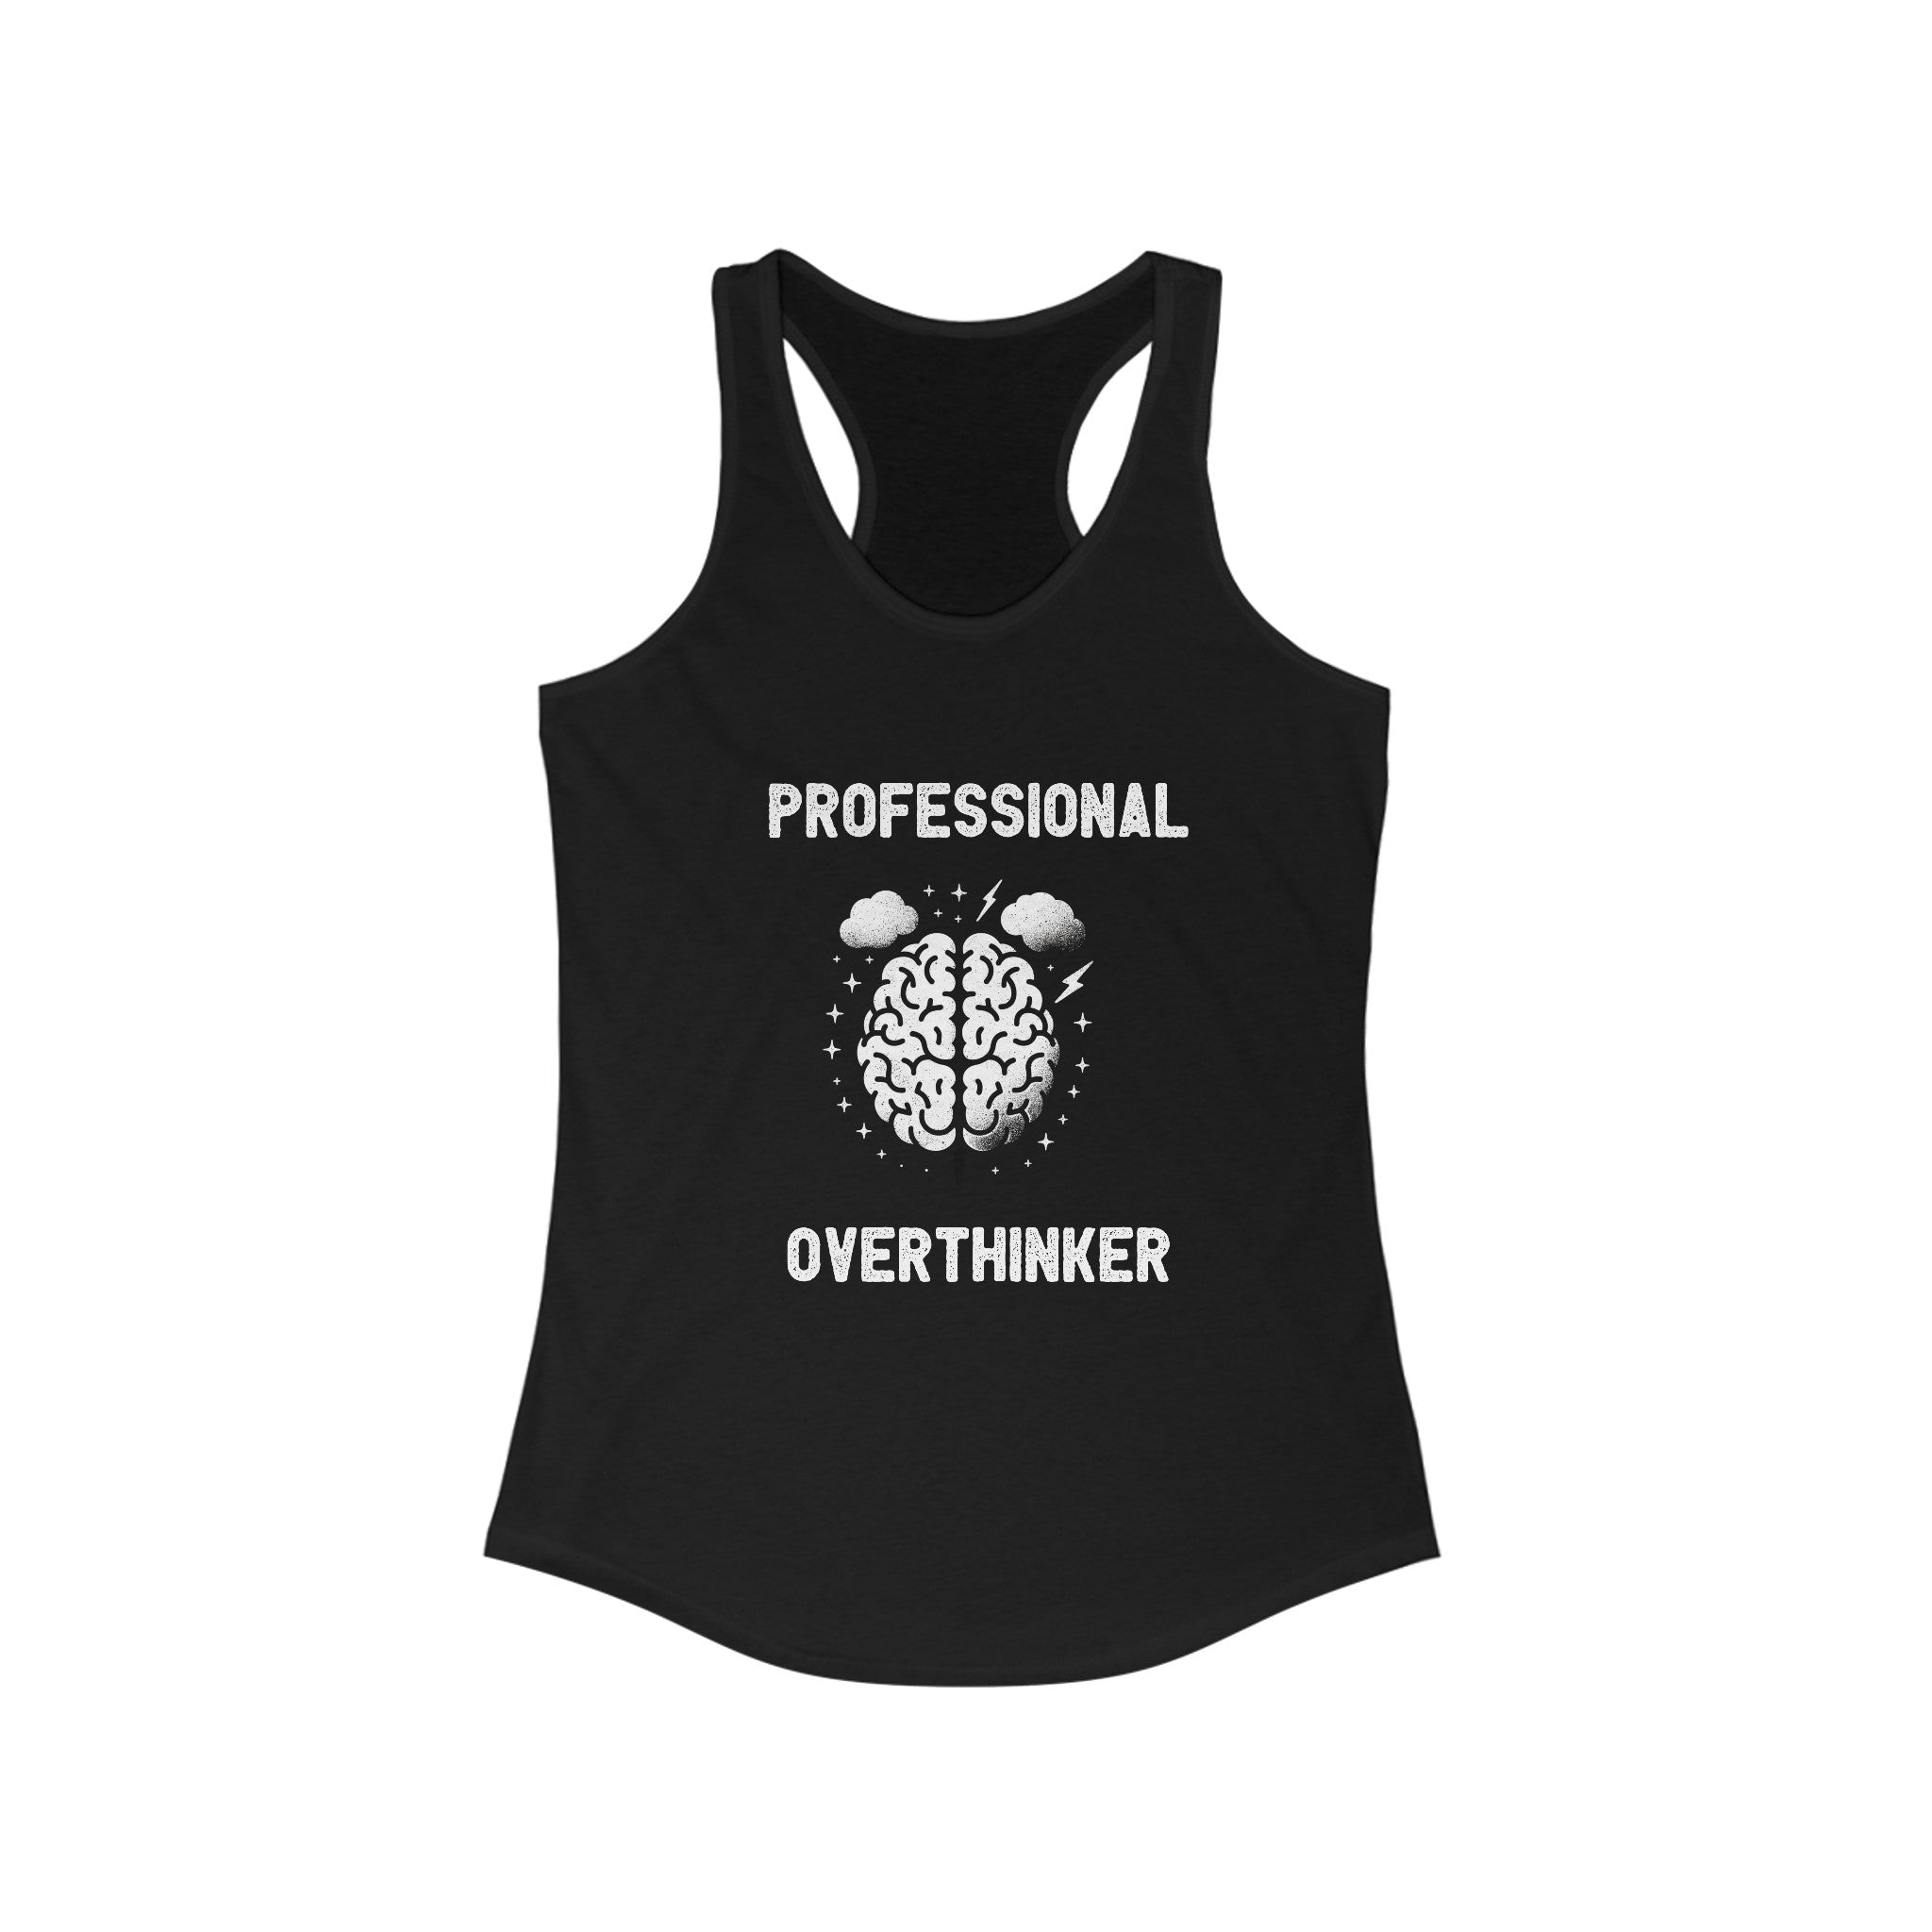 A lightweight, Professional Overthinker - Women's Racerback Tank in black with "Professional Overthinker" printed in white around an image of a brain with thought clouds.